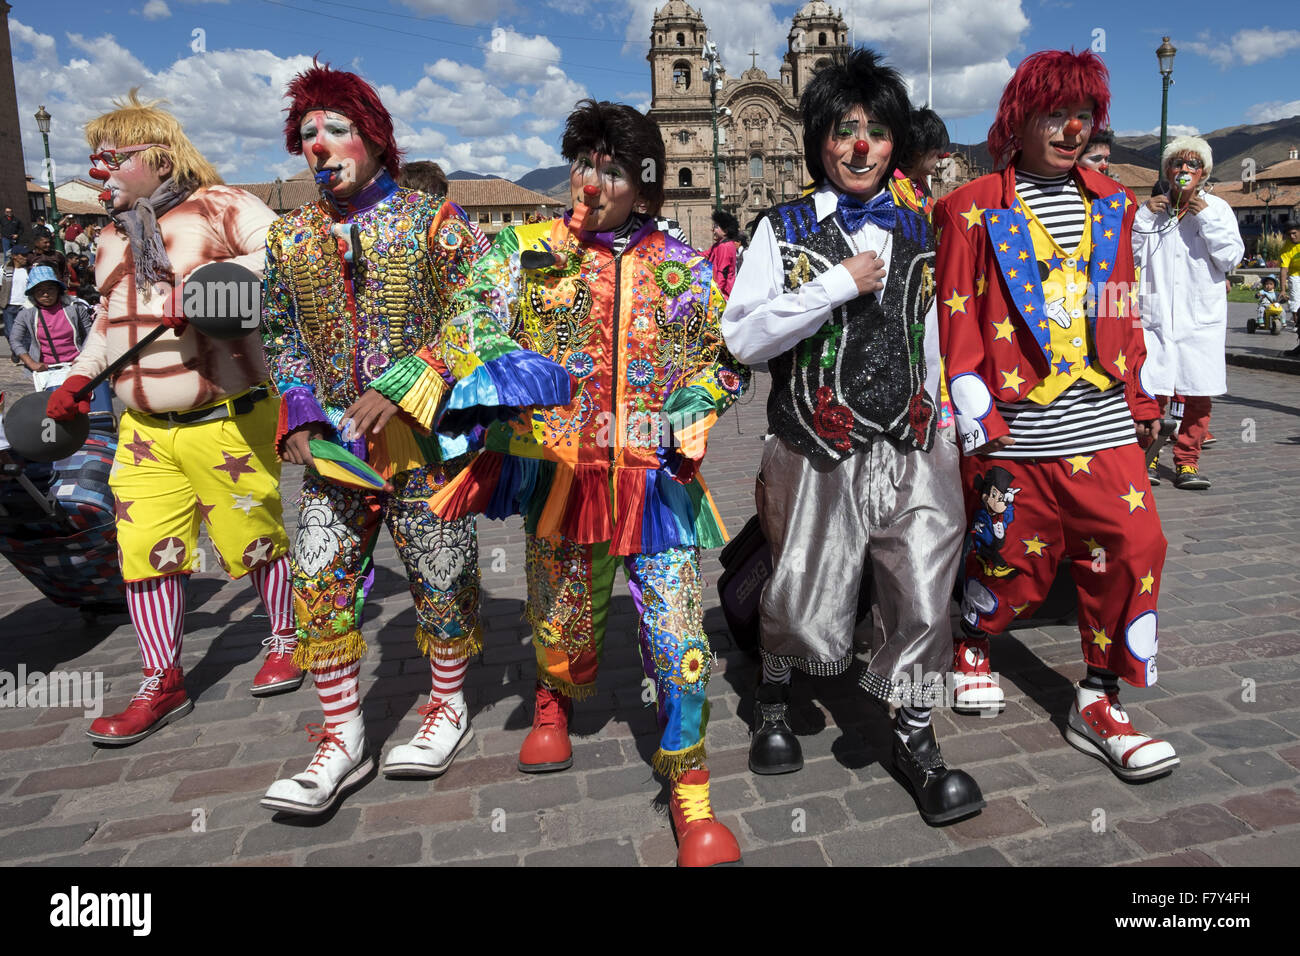 a-group-of-clowns-cuzco-attending-a-convention-of-clowns-throughout-F7Y4FH.jpg